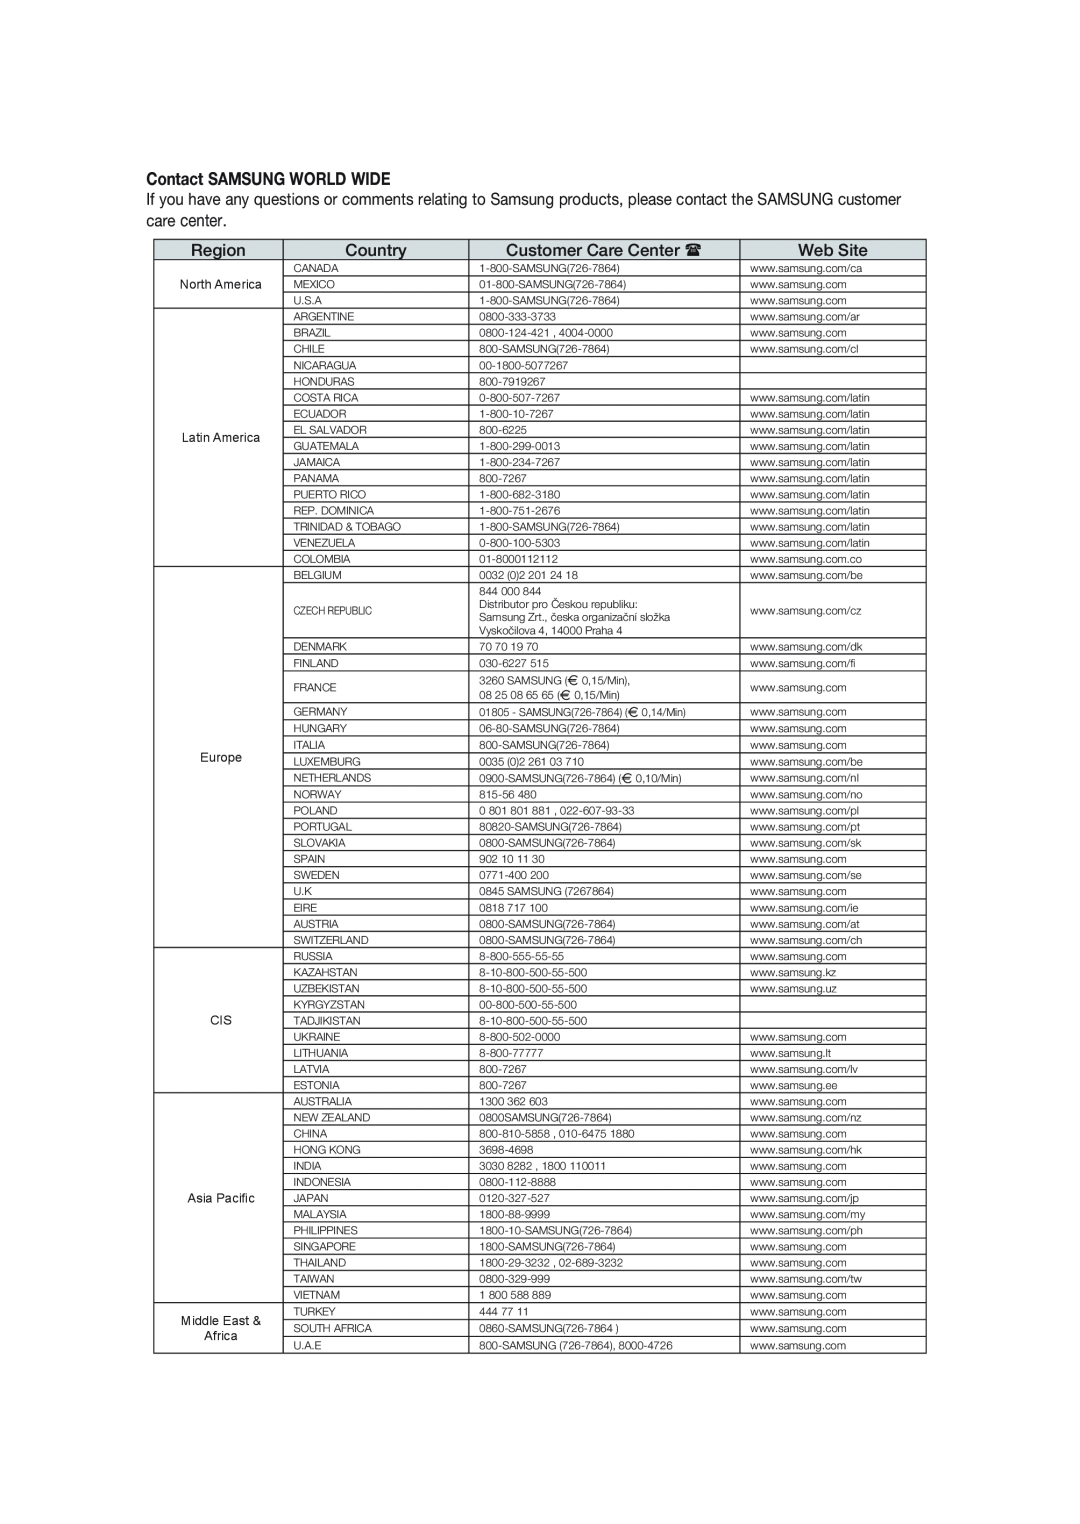 Samsung HE10T user manual Contact SAMSUNG WORLD WIDE, care center Region, Country, Customer Care Center, Web Site 